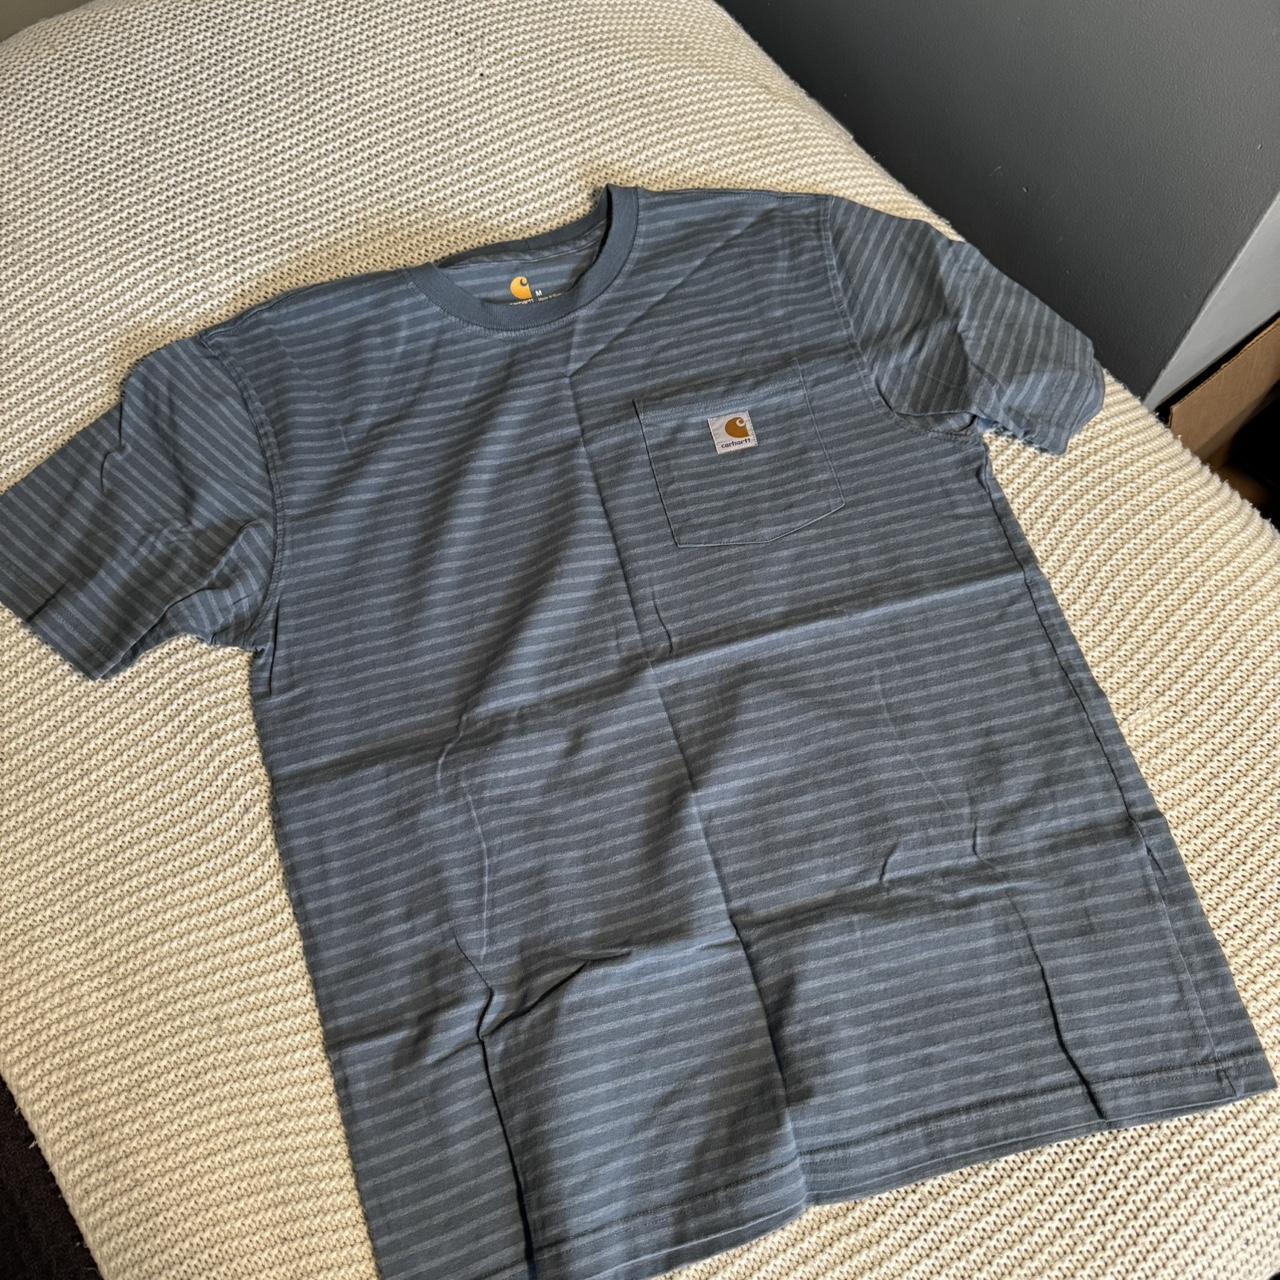 Carhartt WIP, Preloved & Preowned Fashion